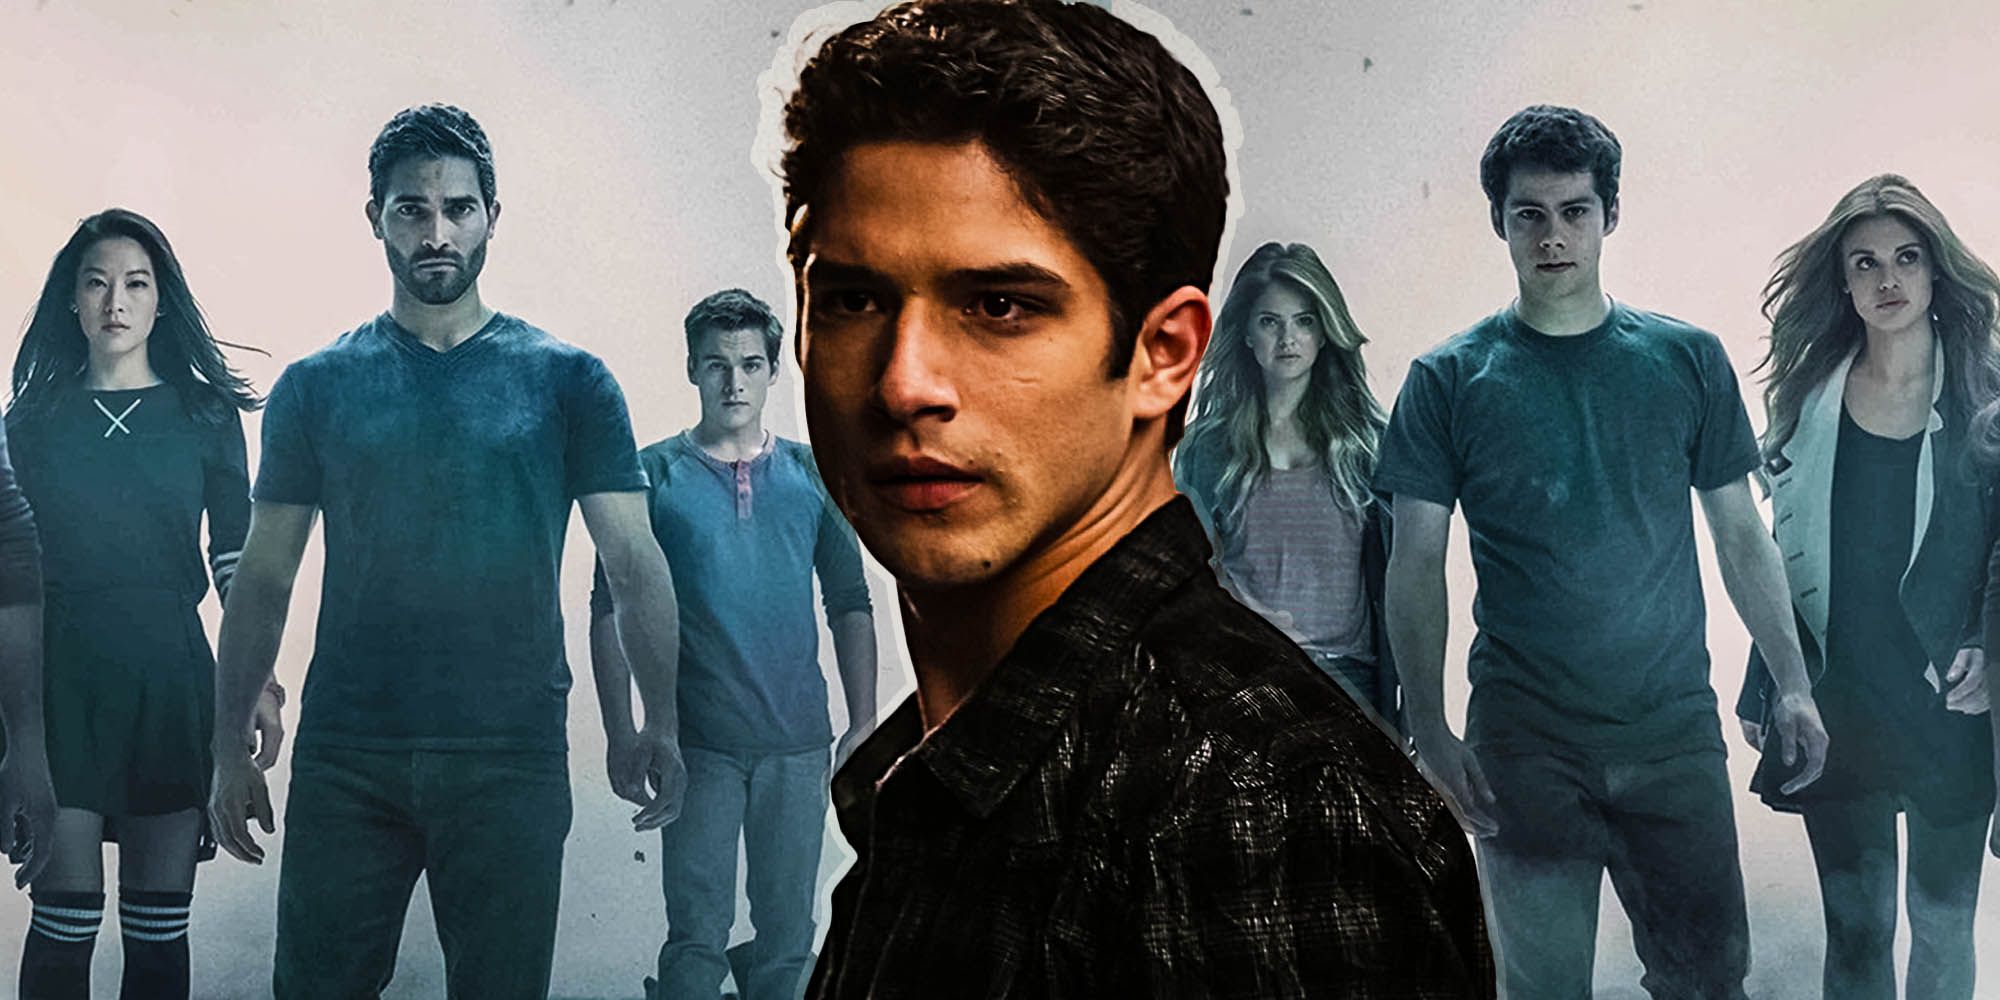 Blended image of Scott against one of the cast of Teen Wolf